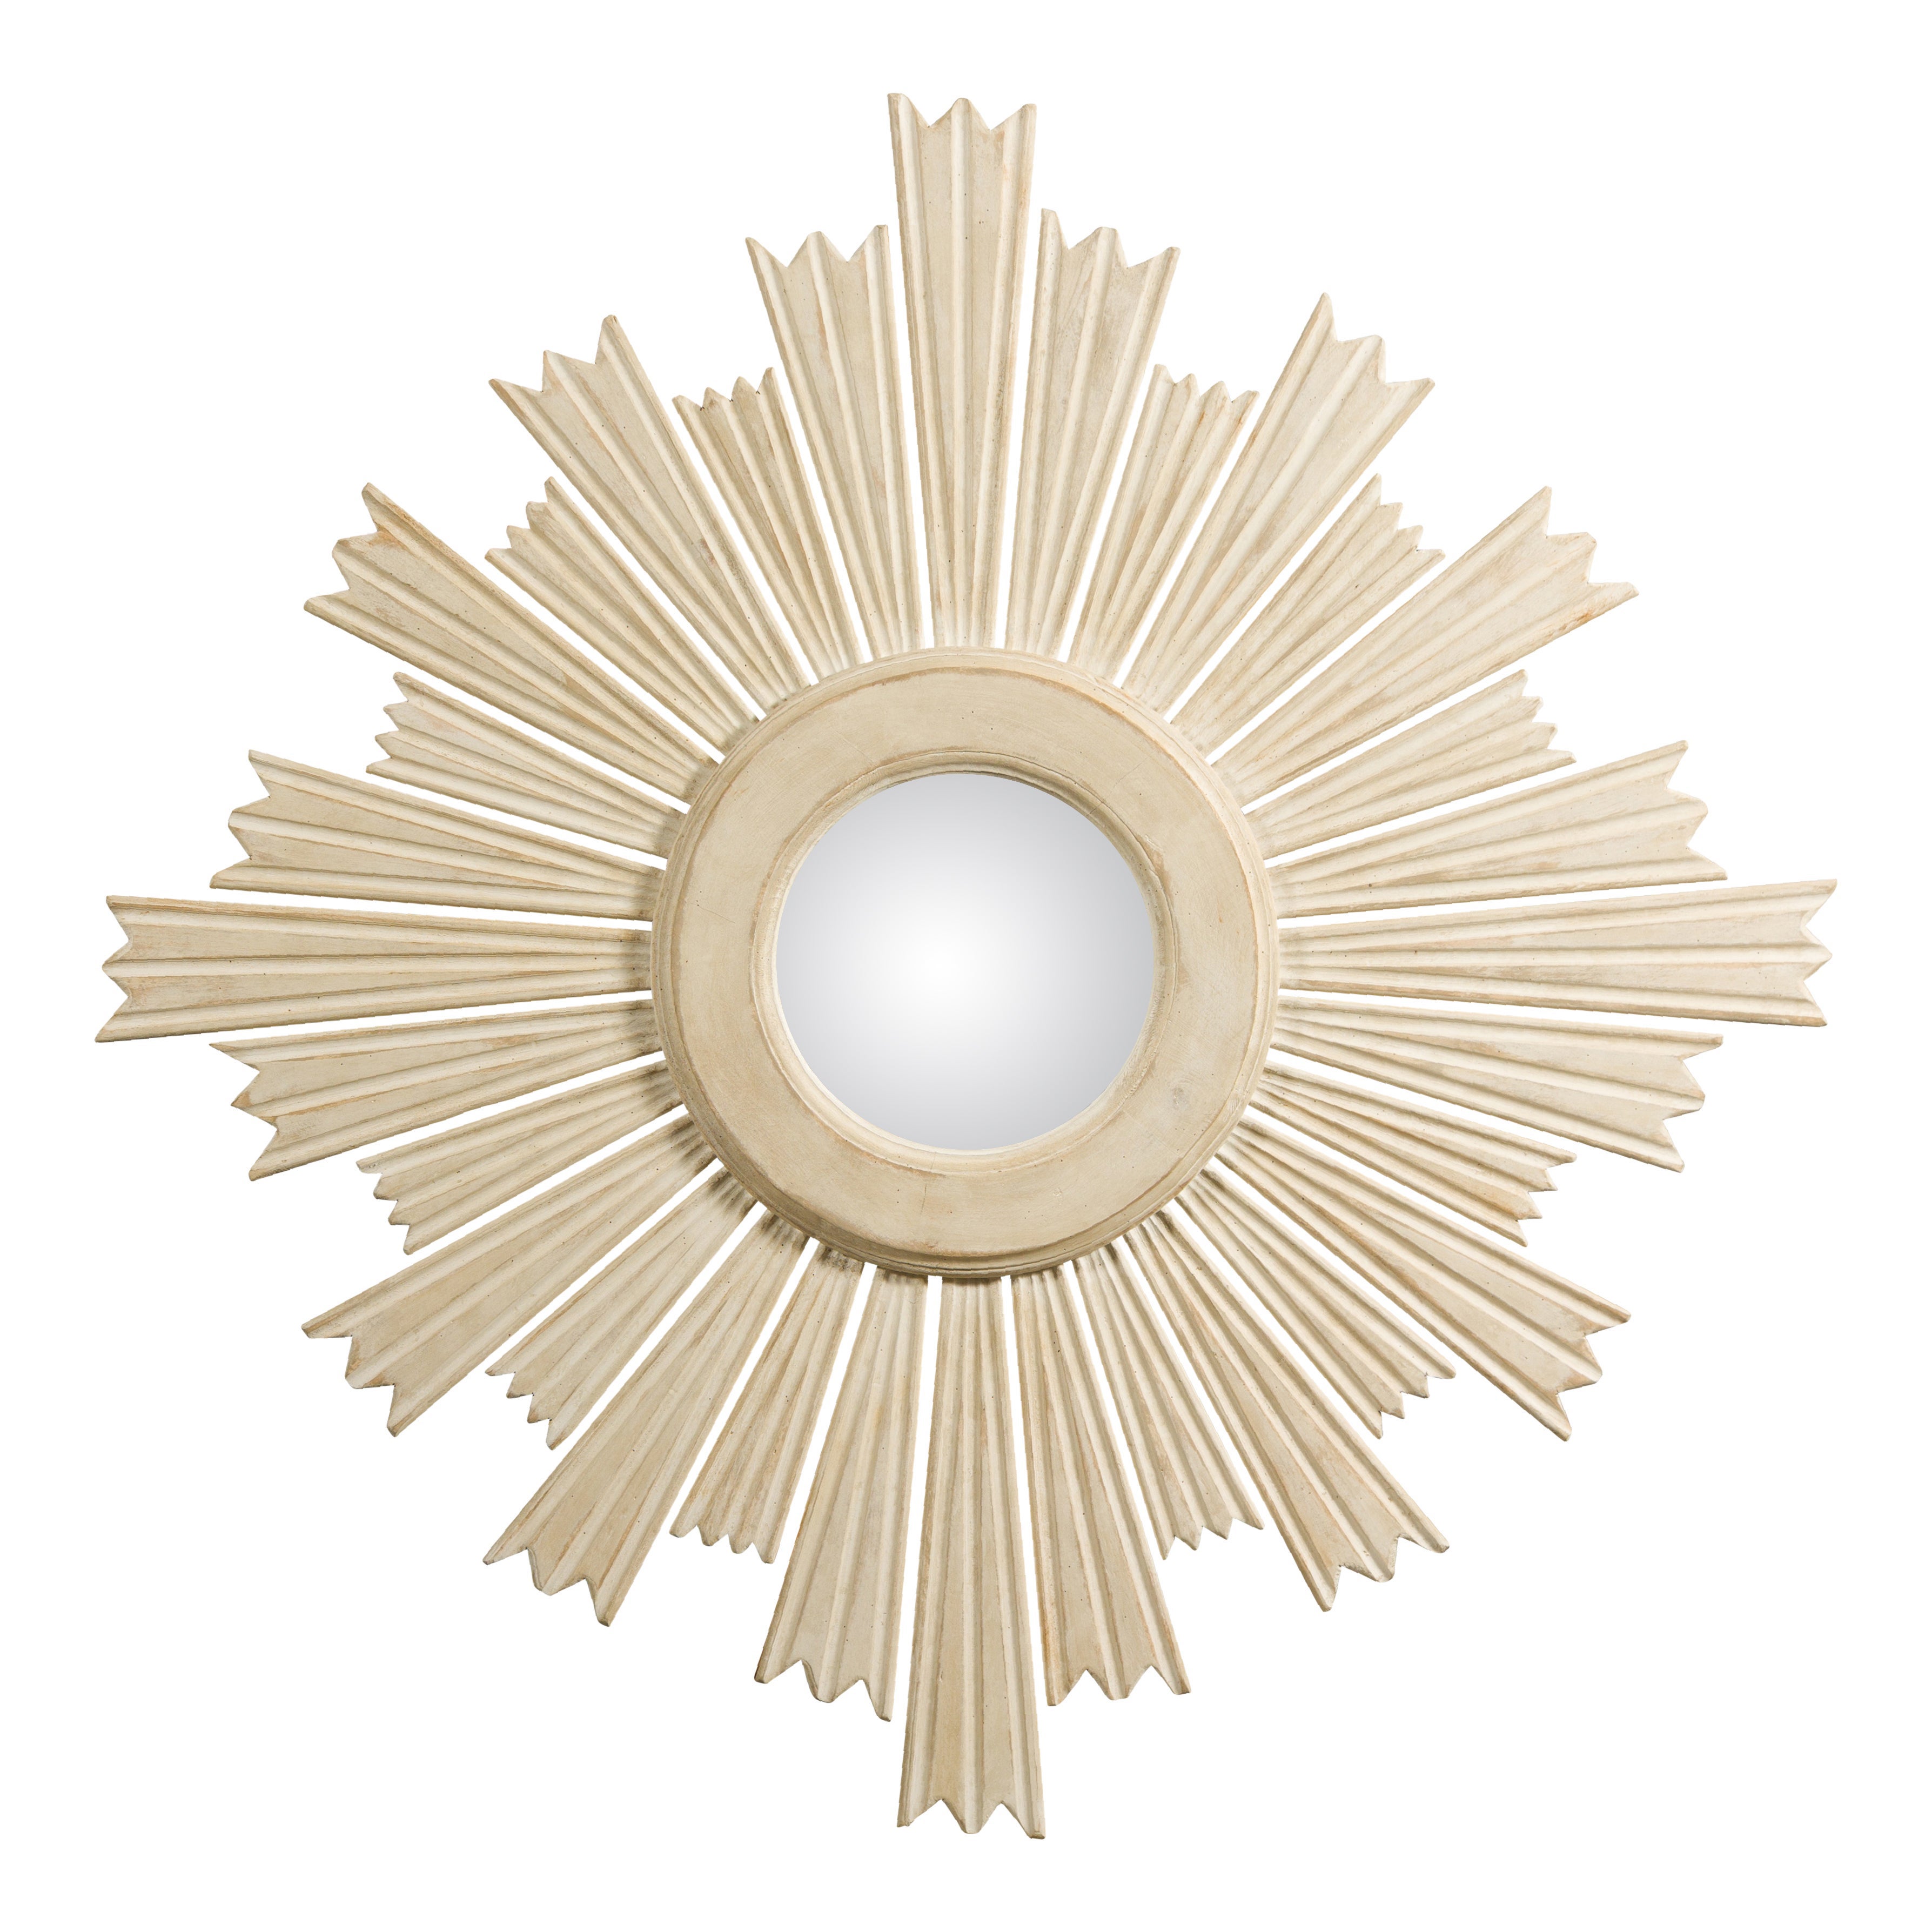 Painted Wood Modern Custom Sunburst with Convex Mirror with Varying Rays For Sale